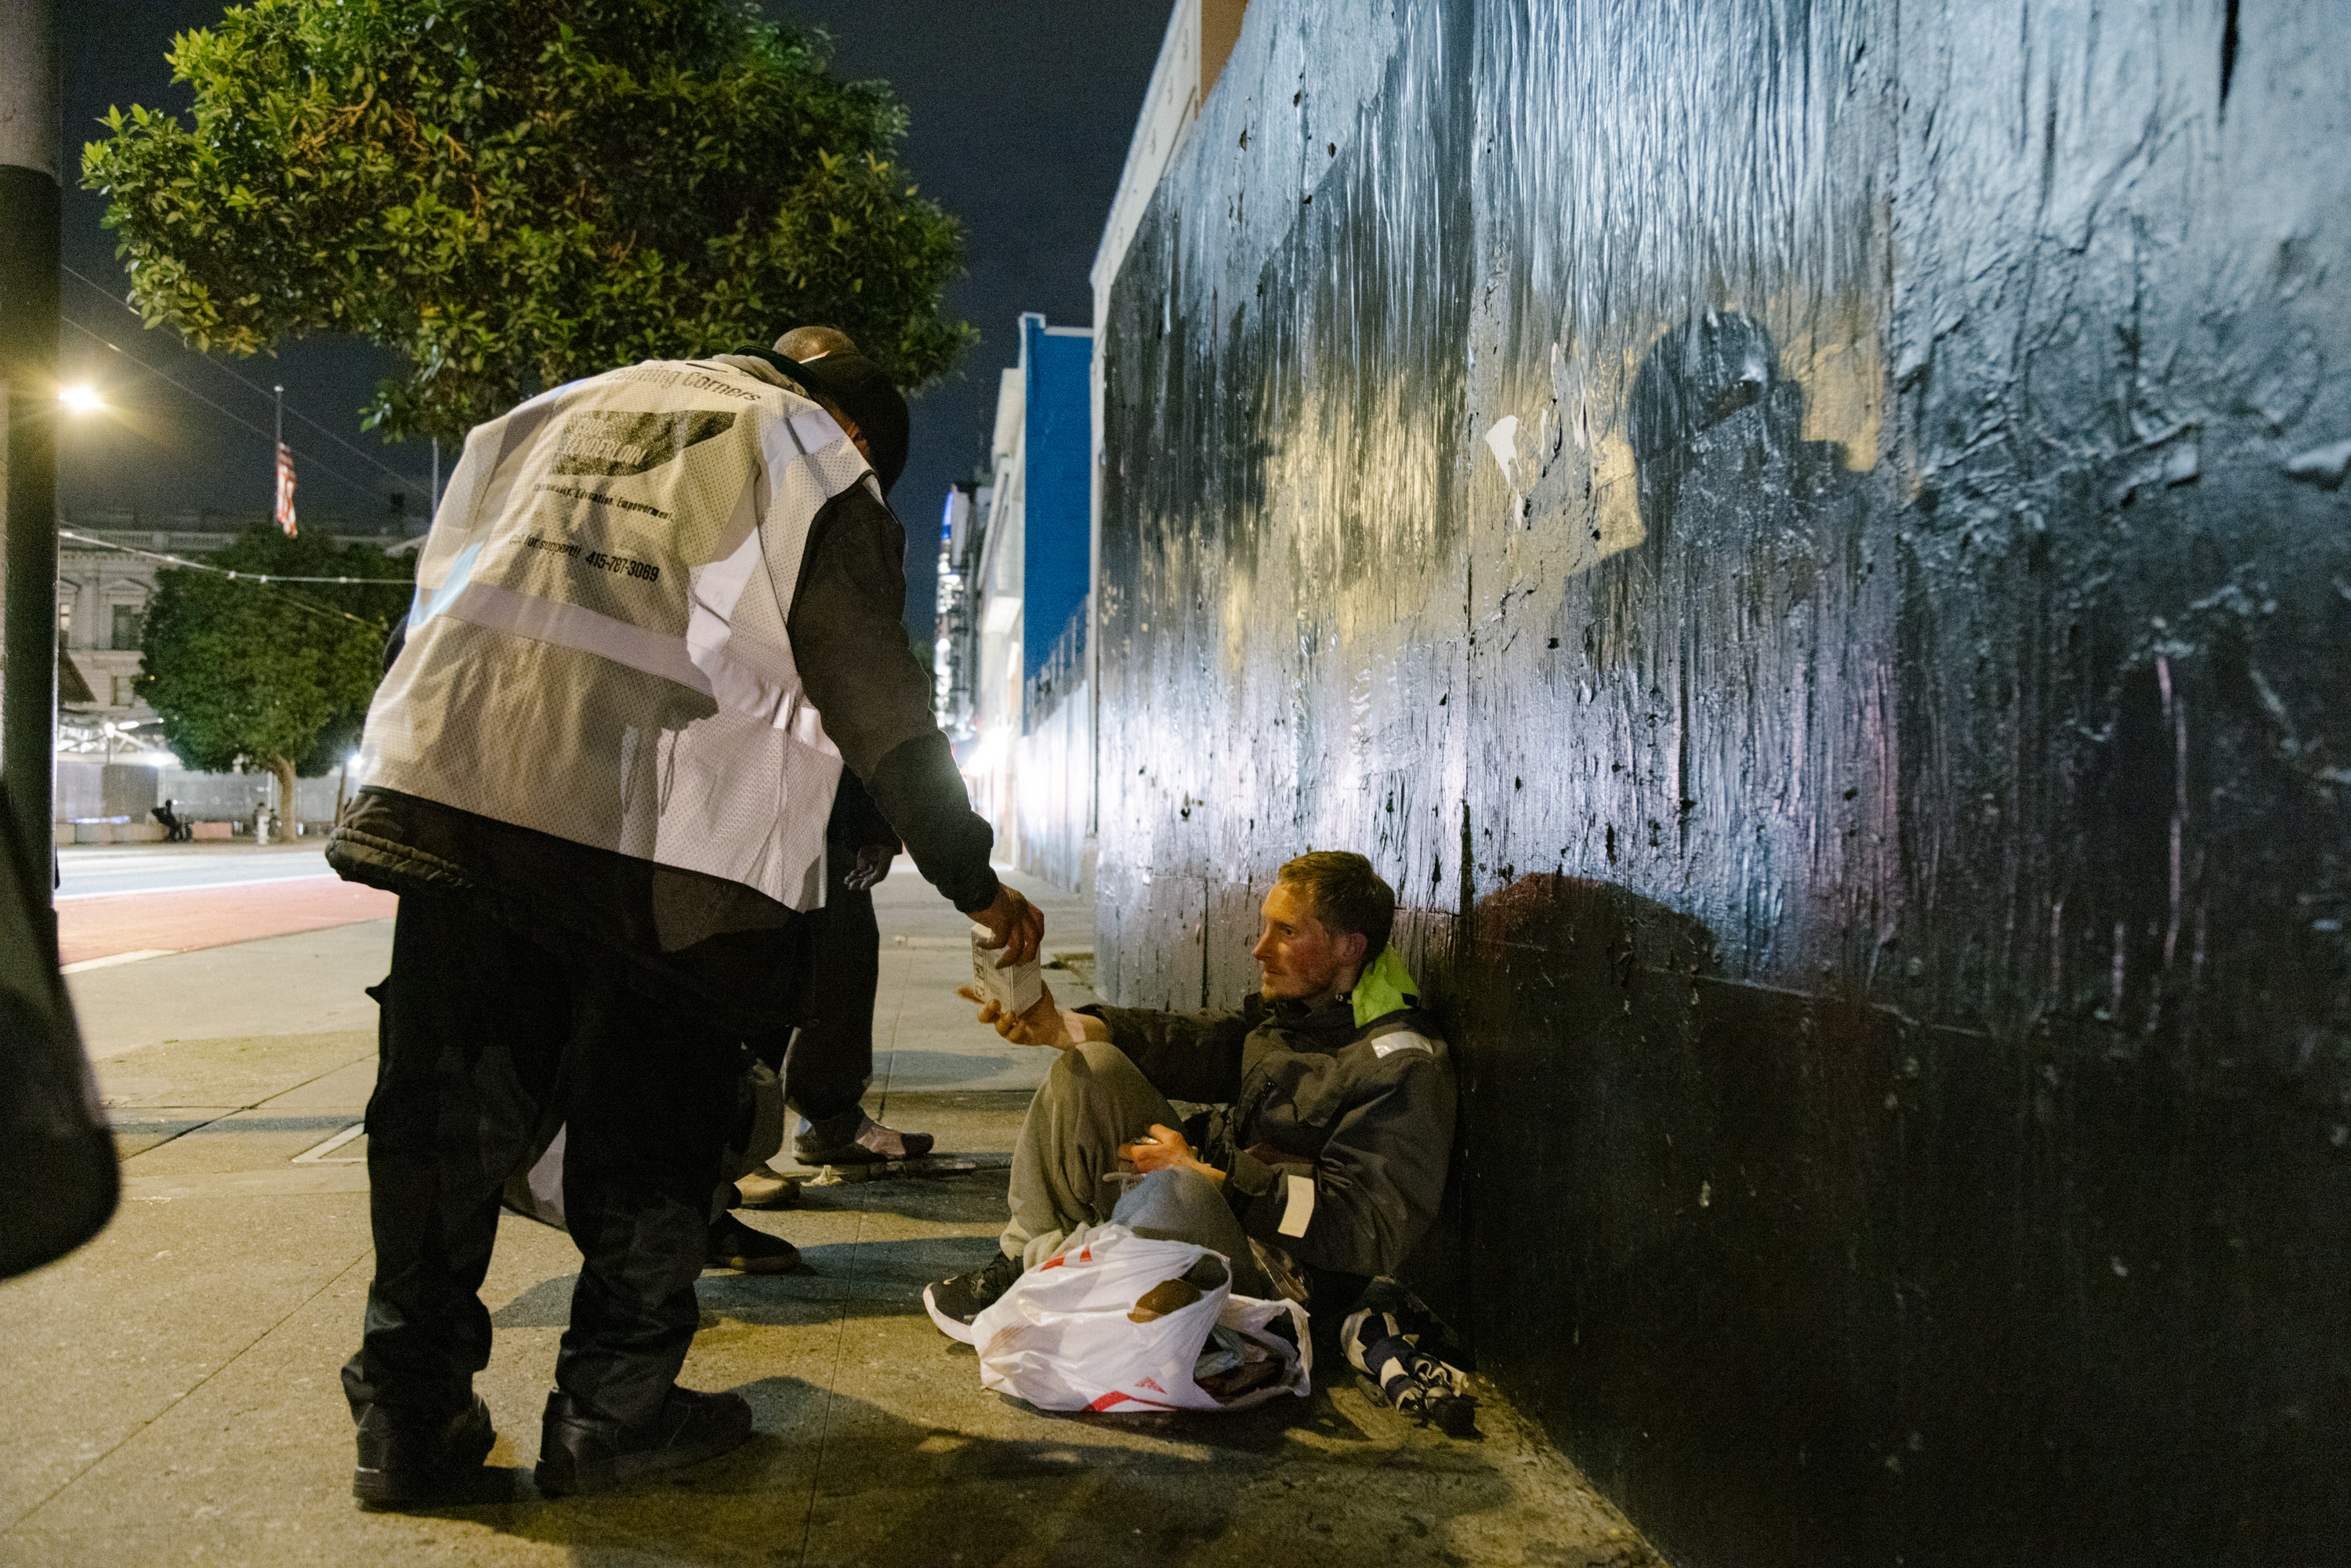 A man in a reflective vest hands food to another sitting by a dark wall at night.